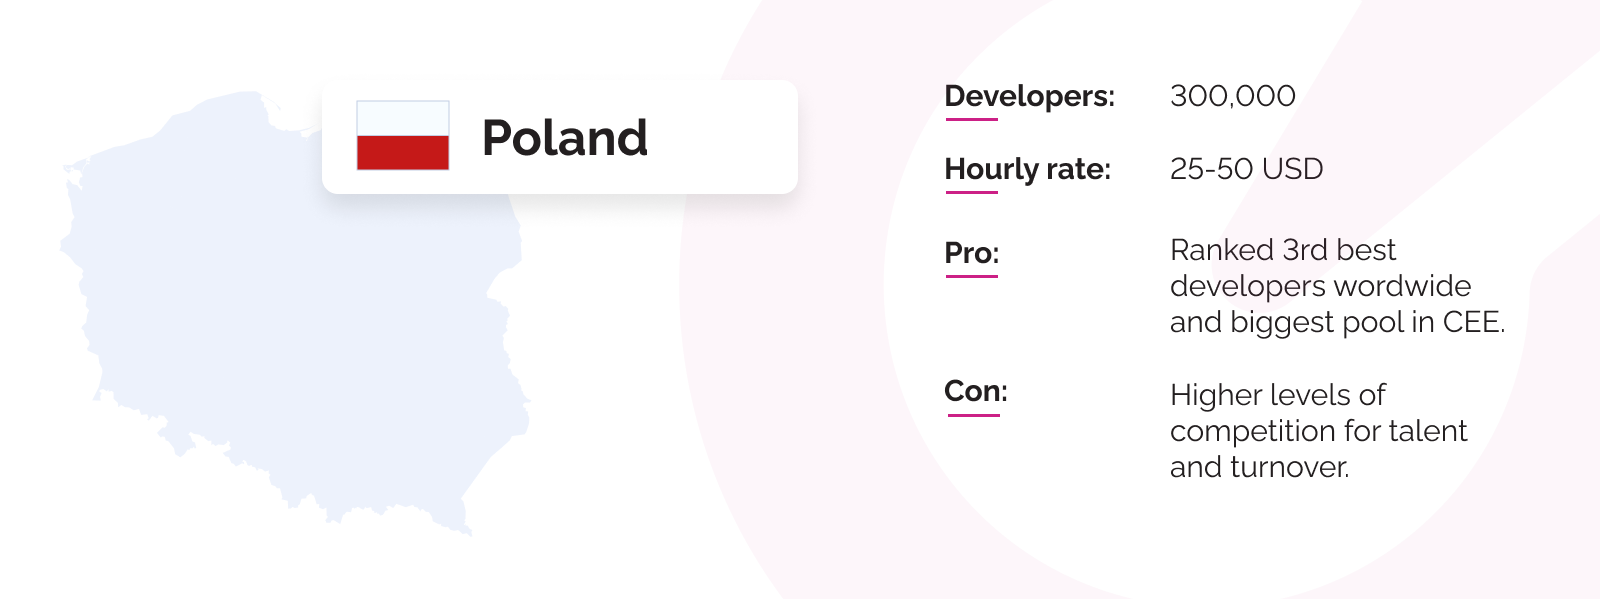 Software development outsourcing statistics for Poland. 